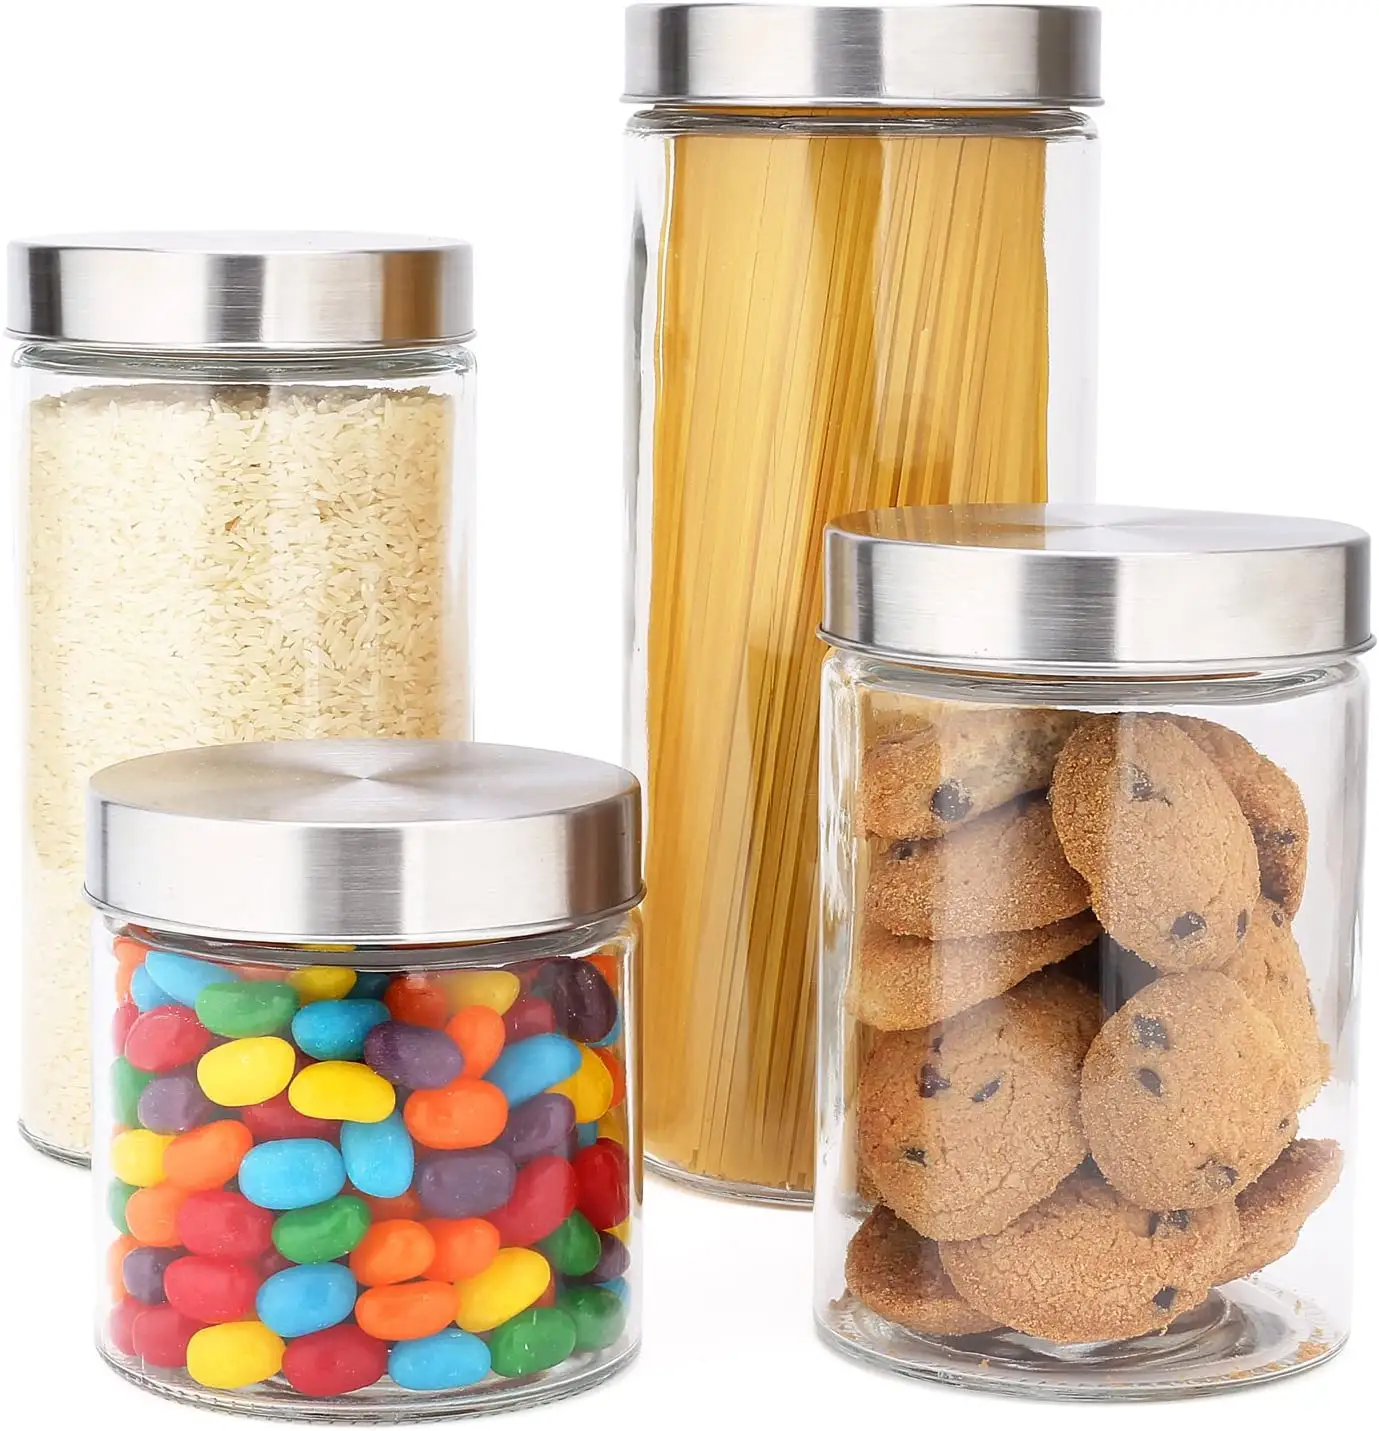 Glass Kitchen Jars with Stainless Steel Lid - Food Storage Containers Offers Modern Style with metal lids